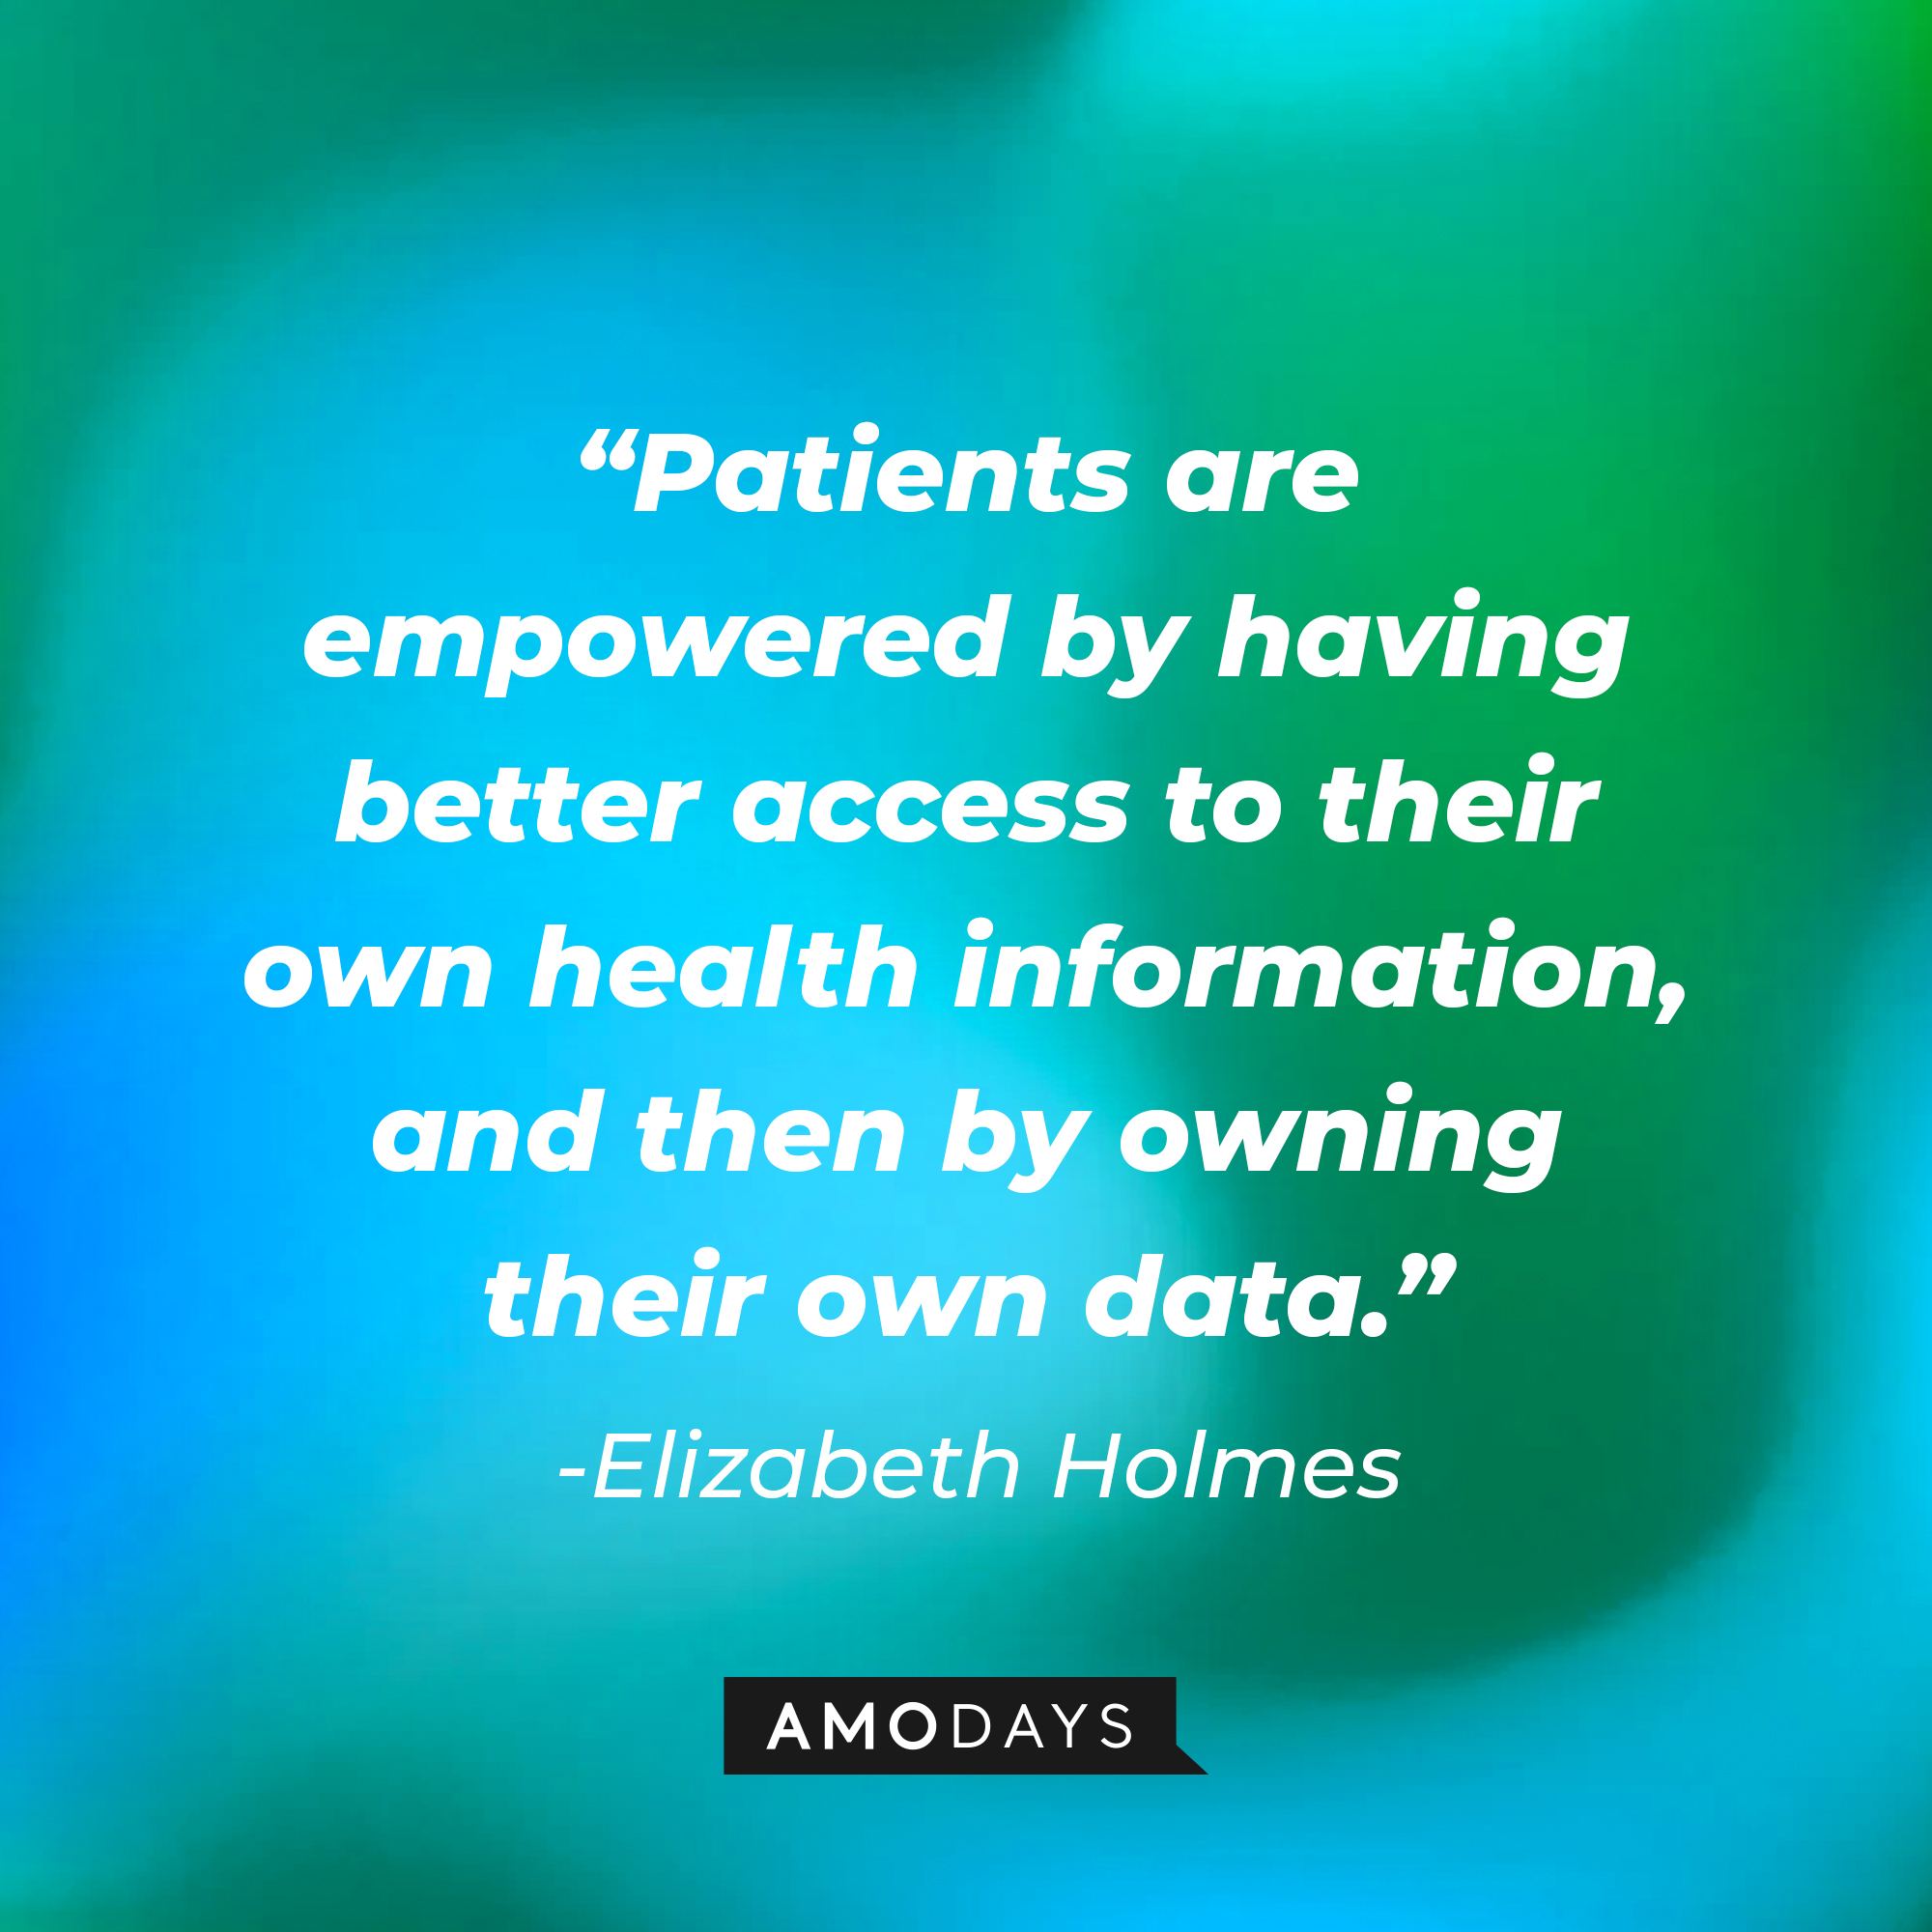 Elizabeth Holmes' quote: "Patients are empowered by having better access to their own health information, and then by owning their own data." | Source: Amodays